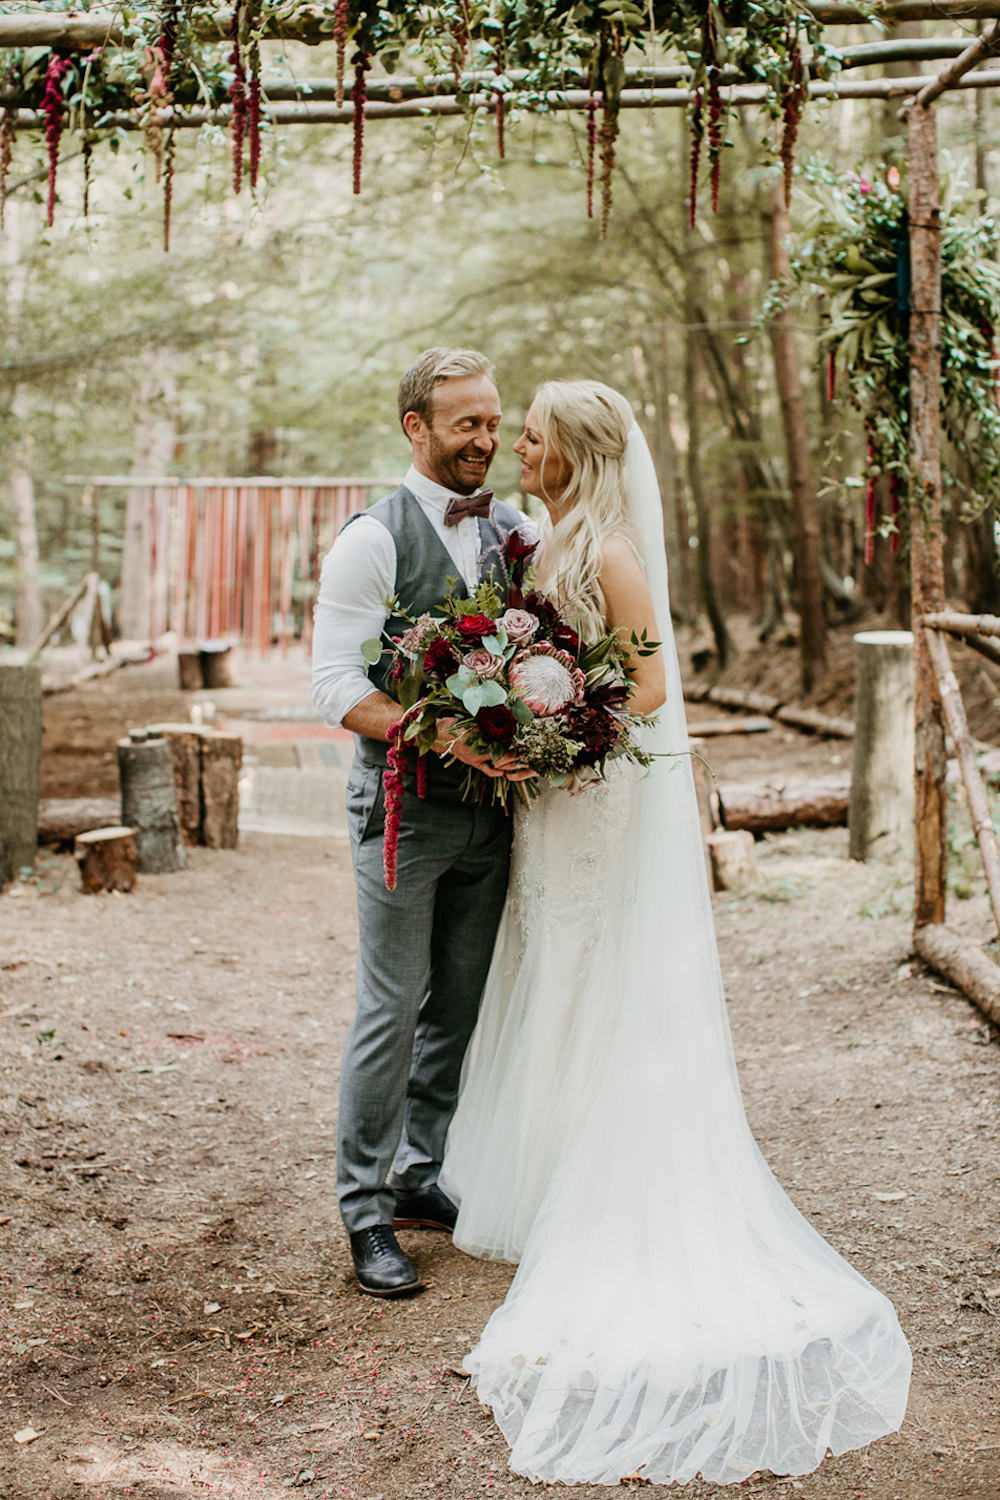 This beautiful couple DIYed their whole wedding in the woods personalizing every single detail